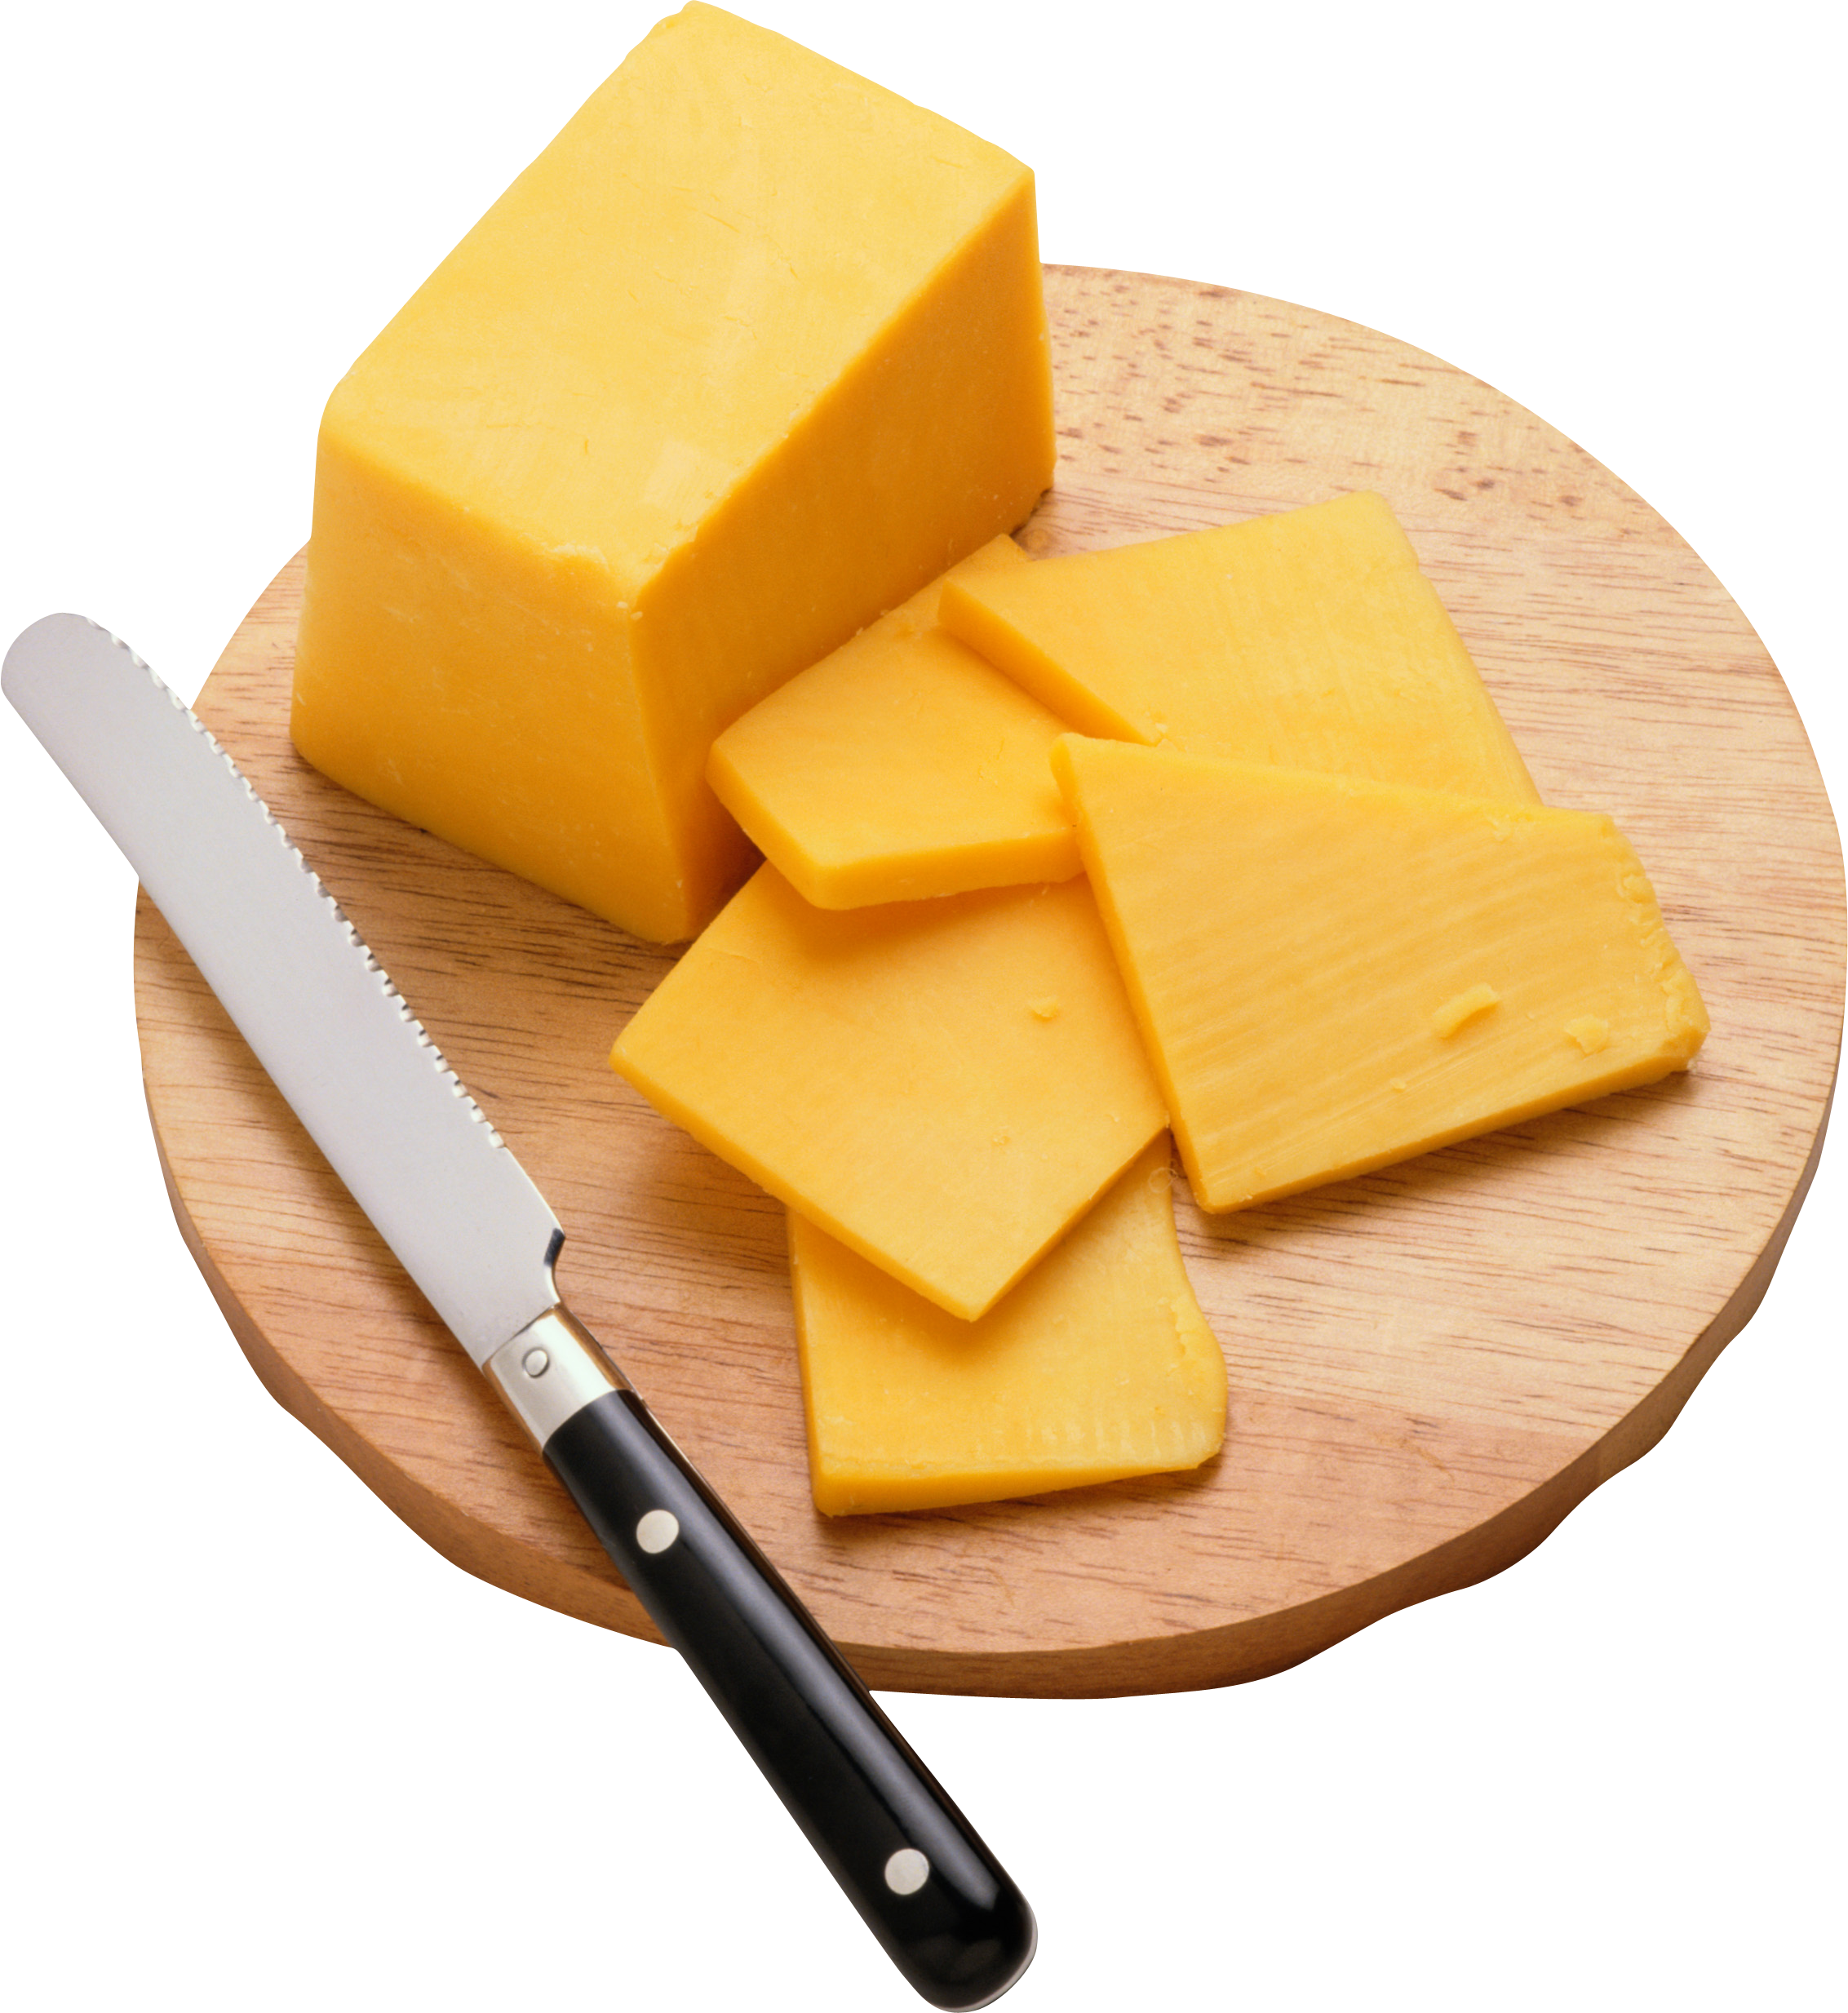 Cheese Piece Slice PNG Transparent Image